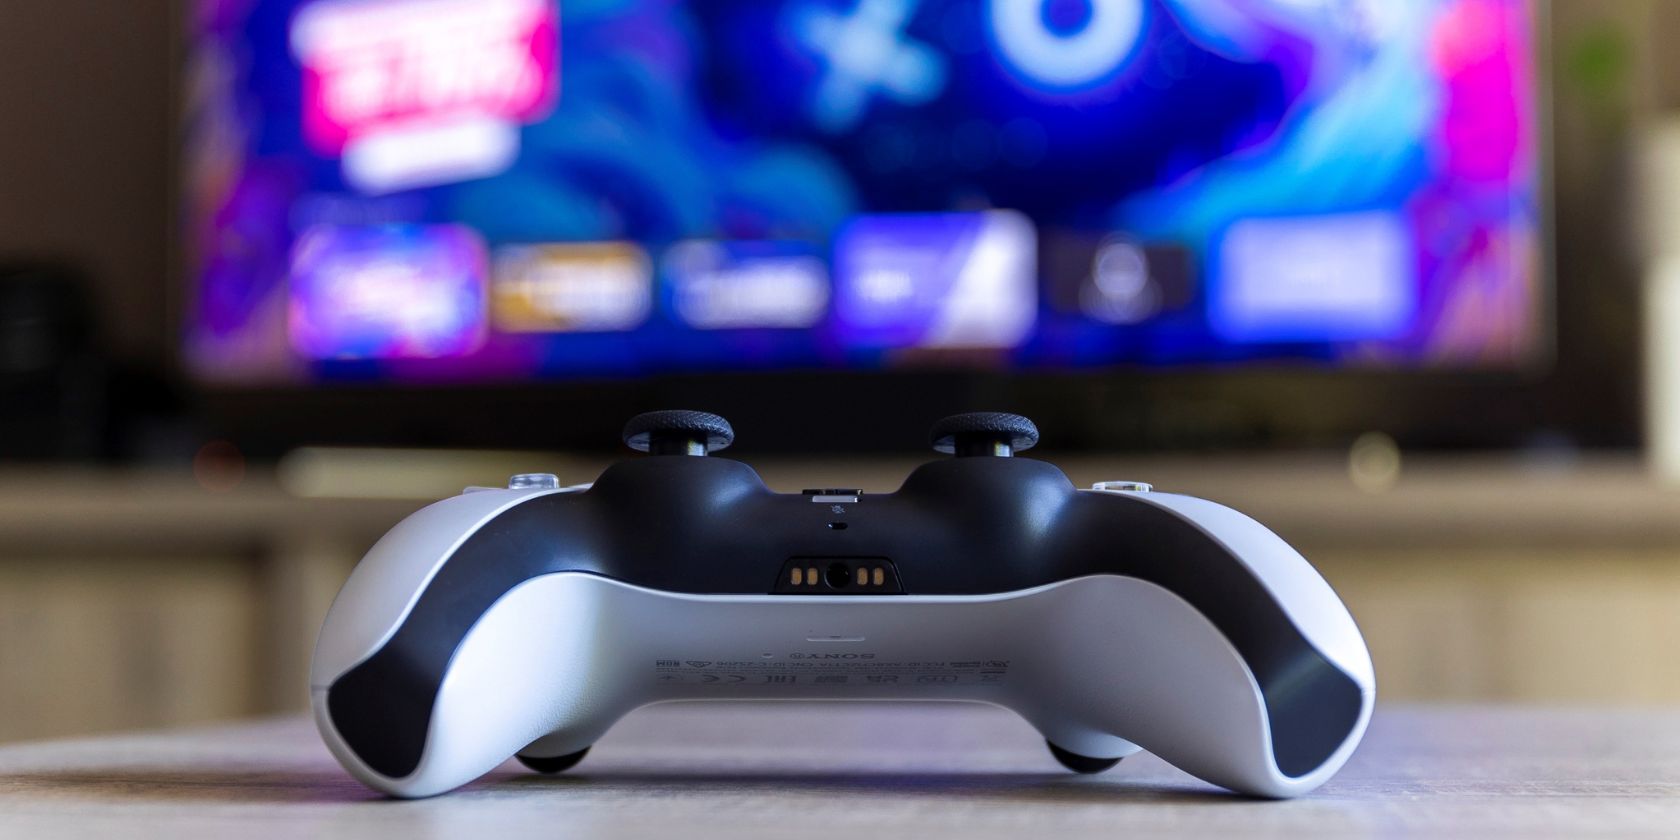 playstation 5 controller on a table with tv screen in the background